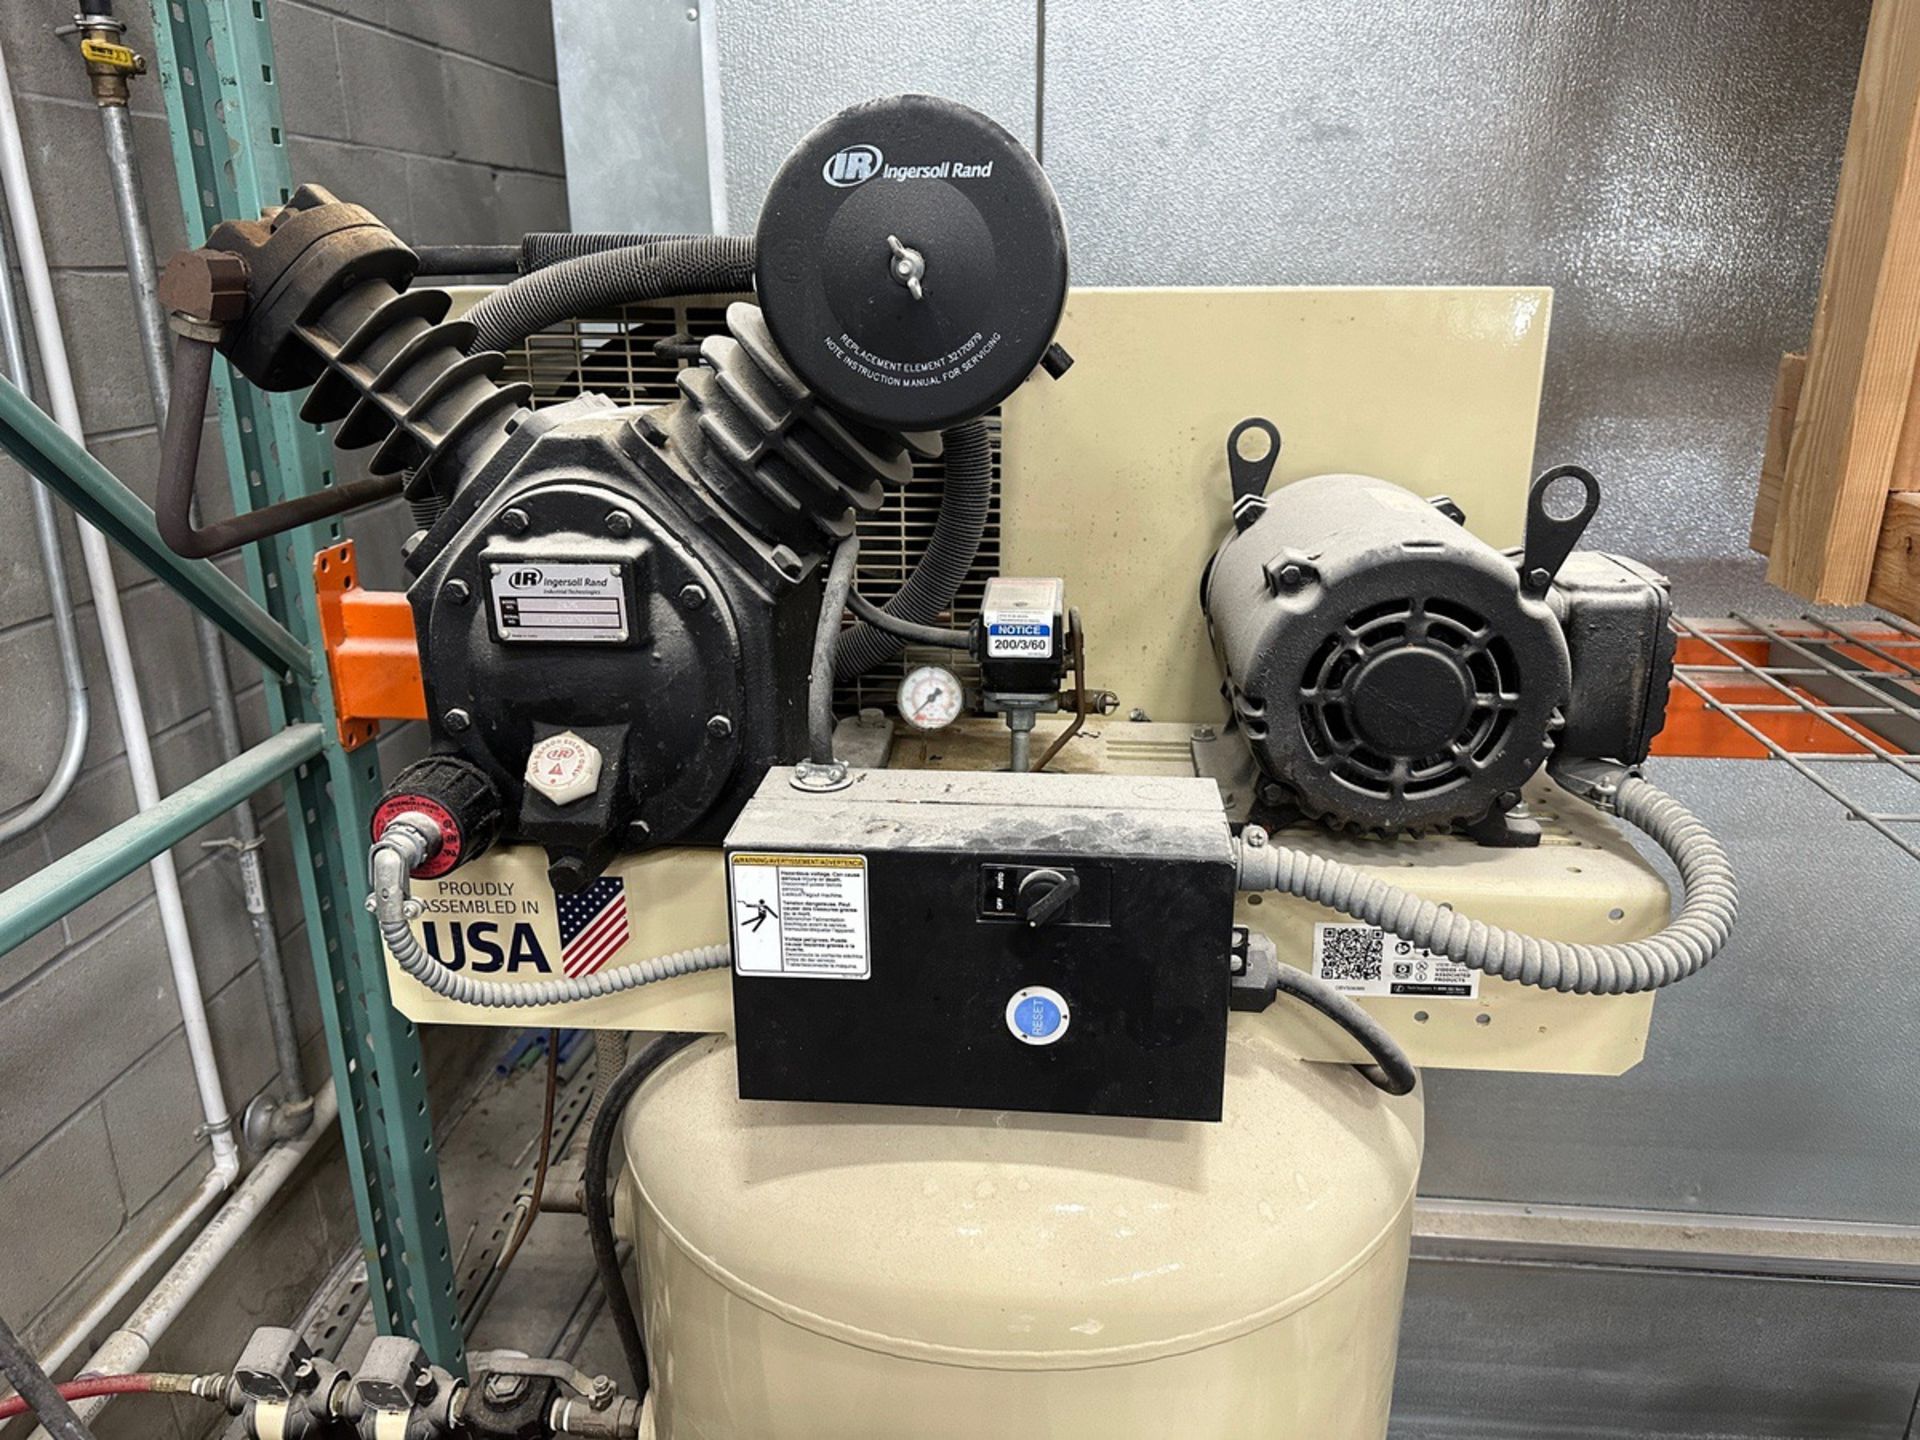 Ingersoll Rand 80 Gallon Air Compressor - Model 2475N7.5-P with Ingersoll | Rig Fee $125 - Image 3 of 7